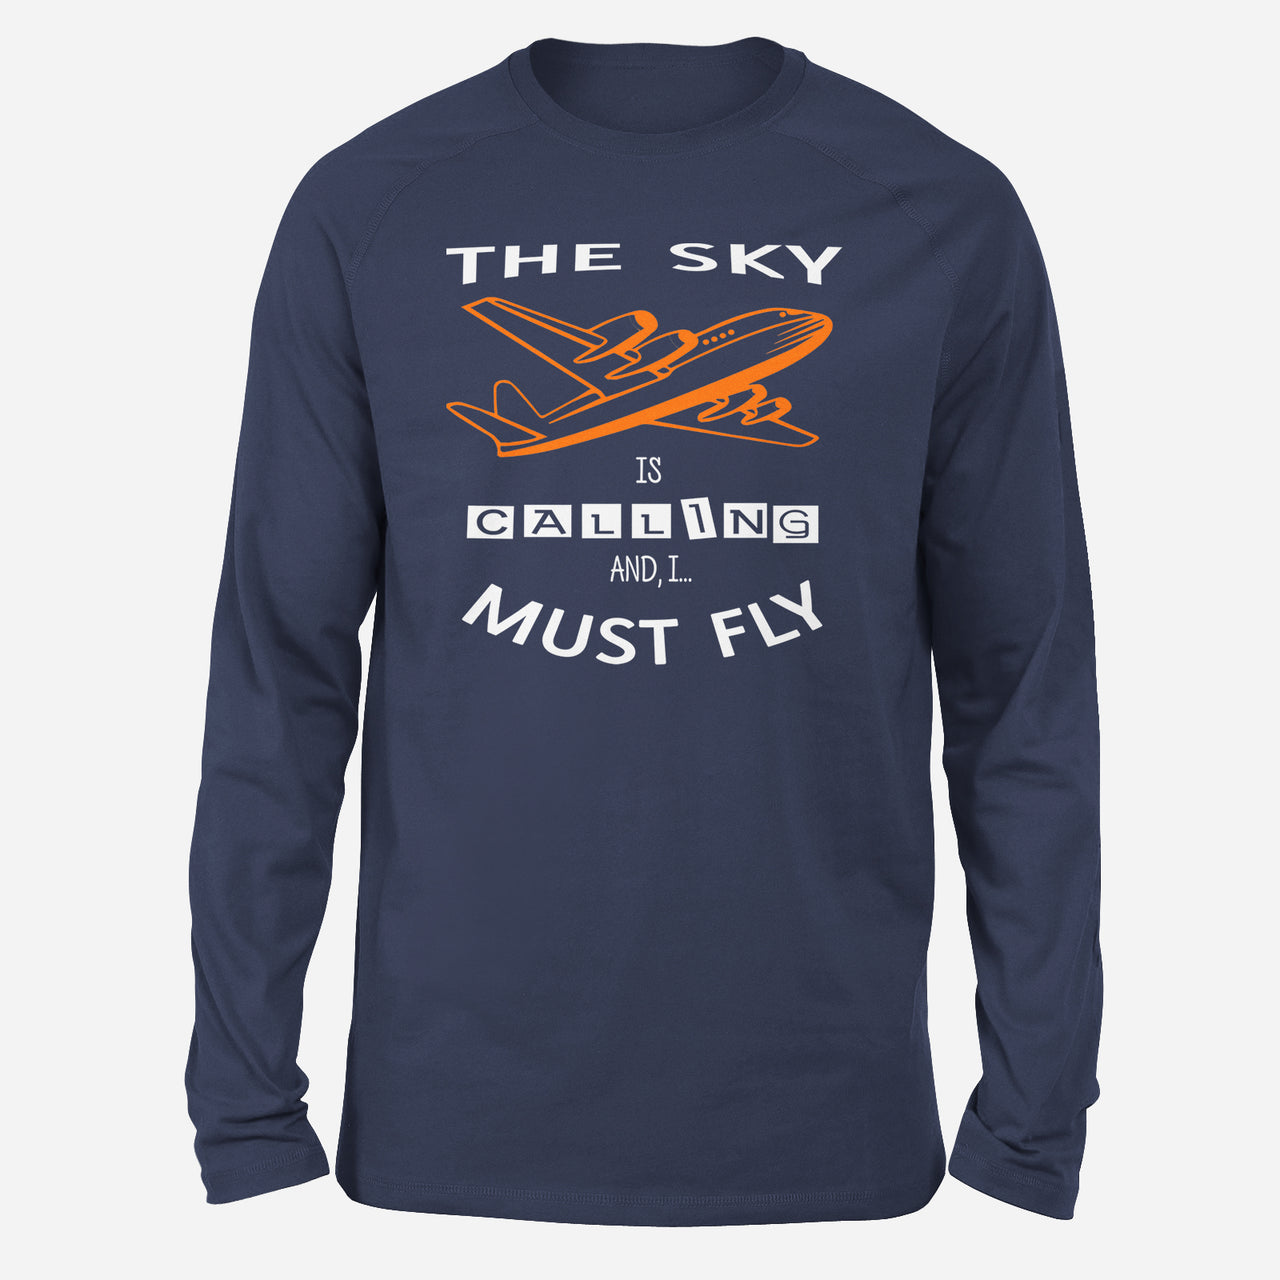 The Sky is Calling and I Must Fly Designed Long-Sleeve T-Shirts